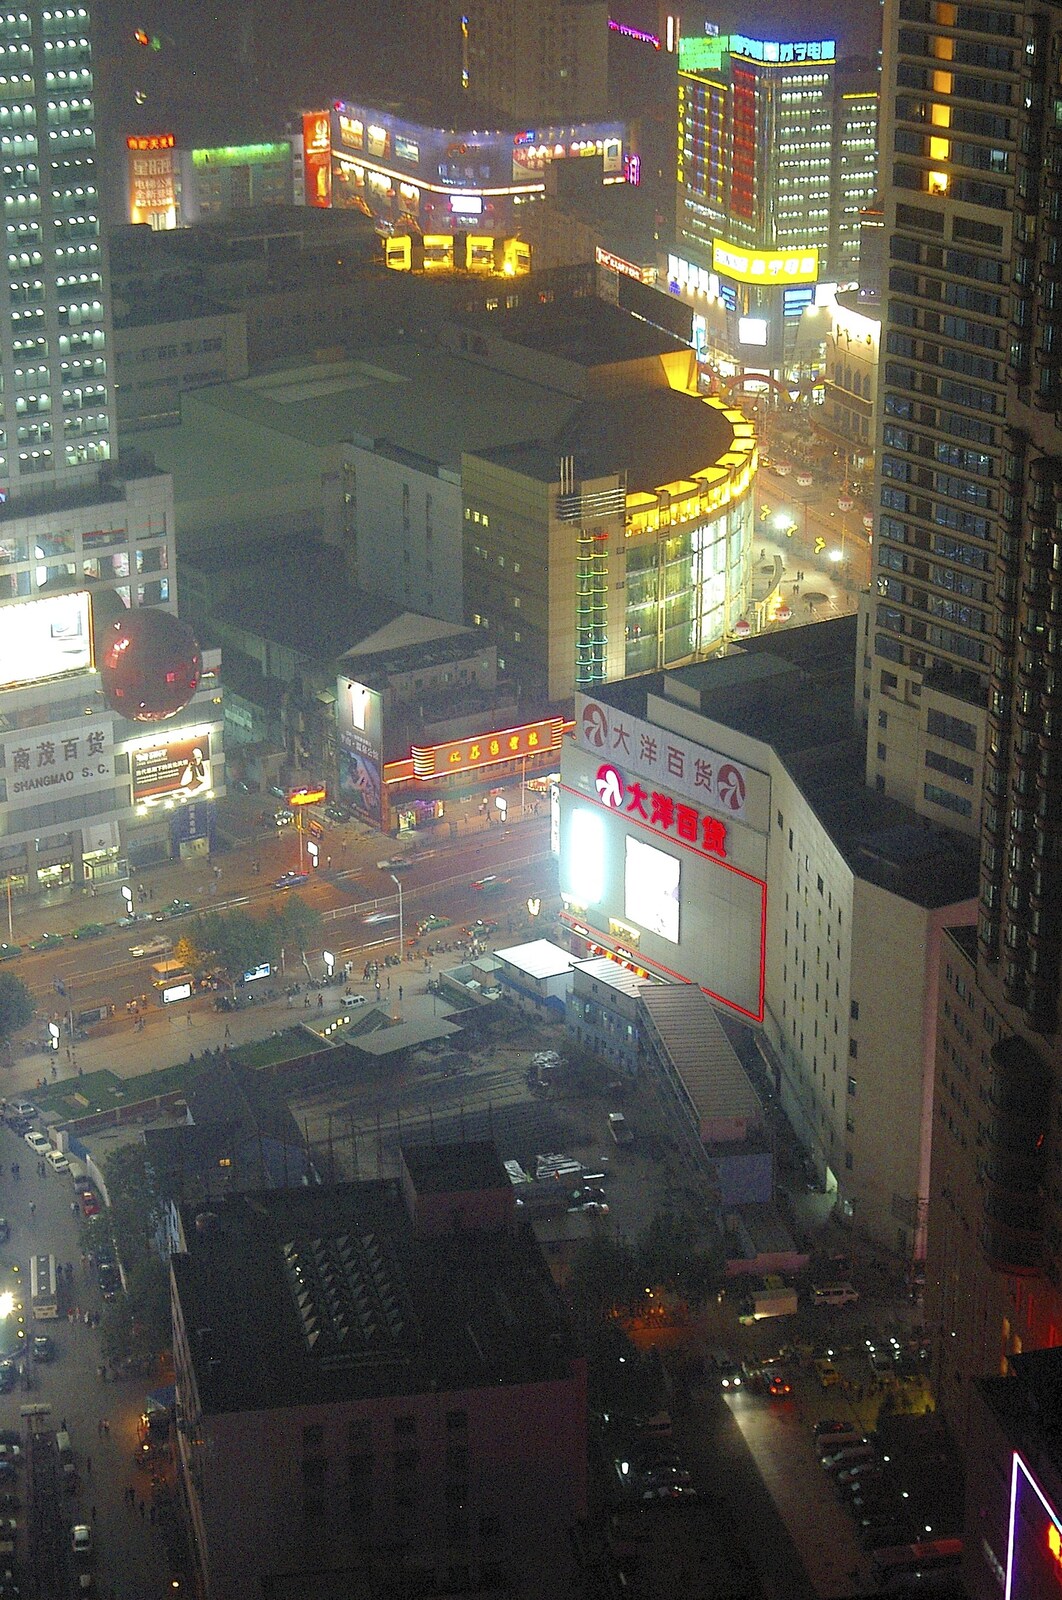 A view of the streets from the 46th floor from Nanjing by Night, Nanjing, Jiangsu Province, China - 4th October 2006